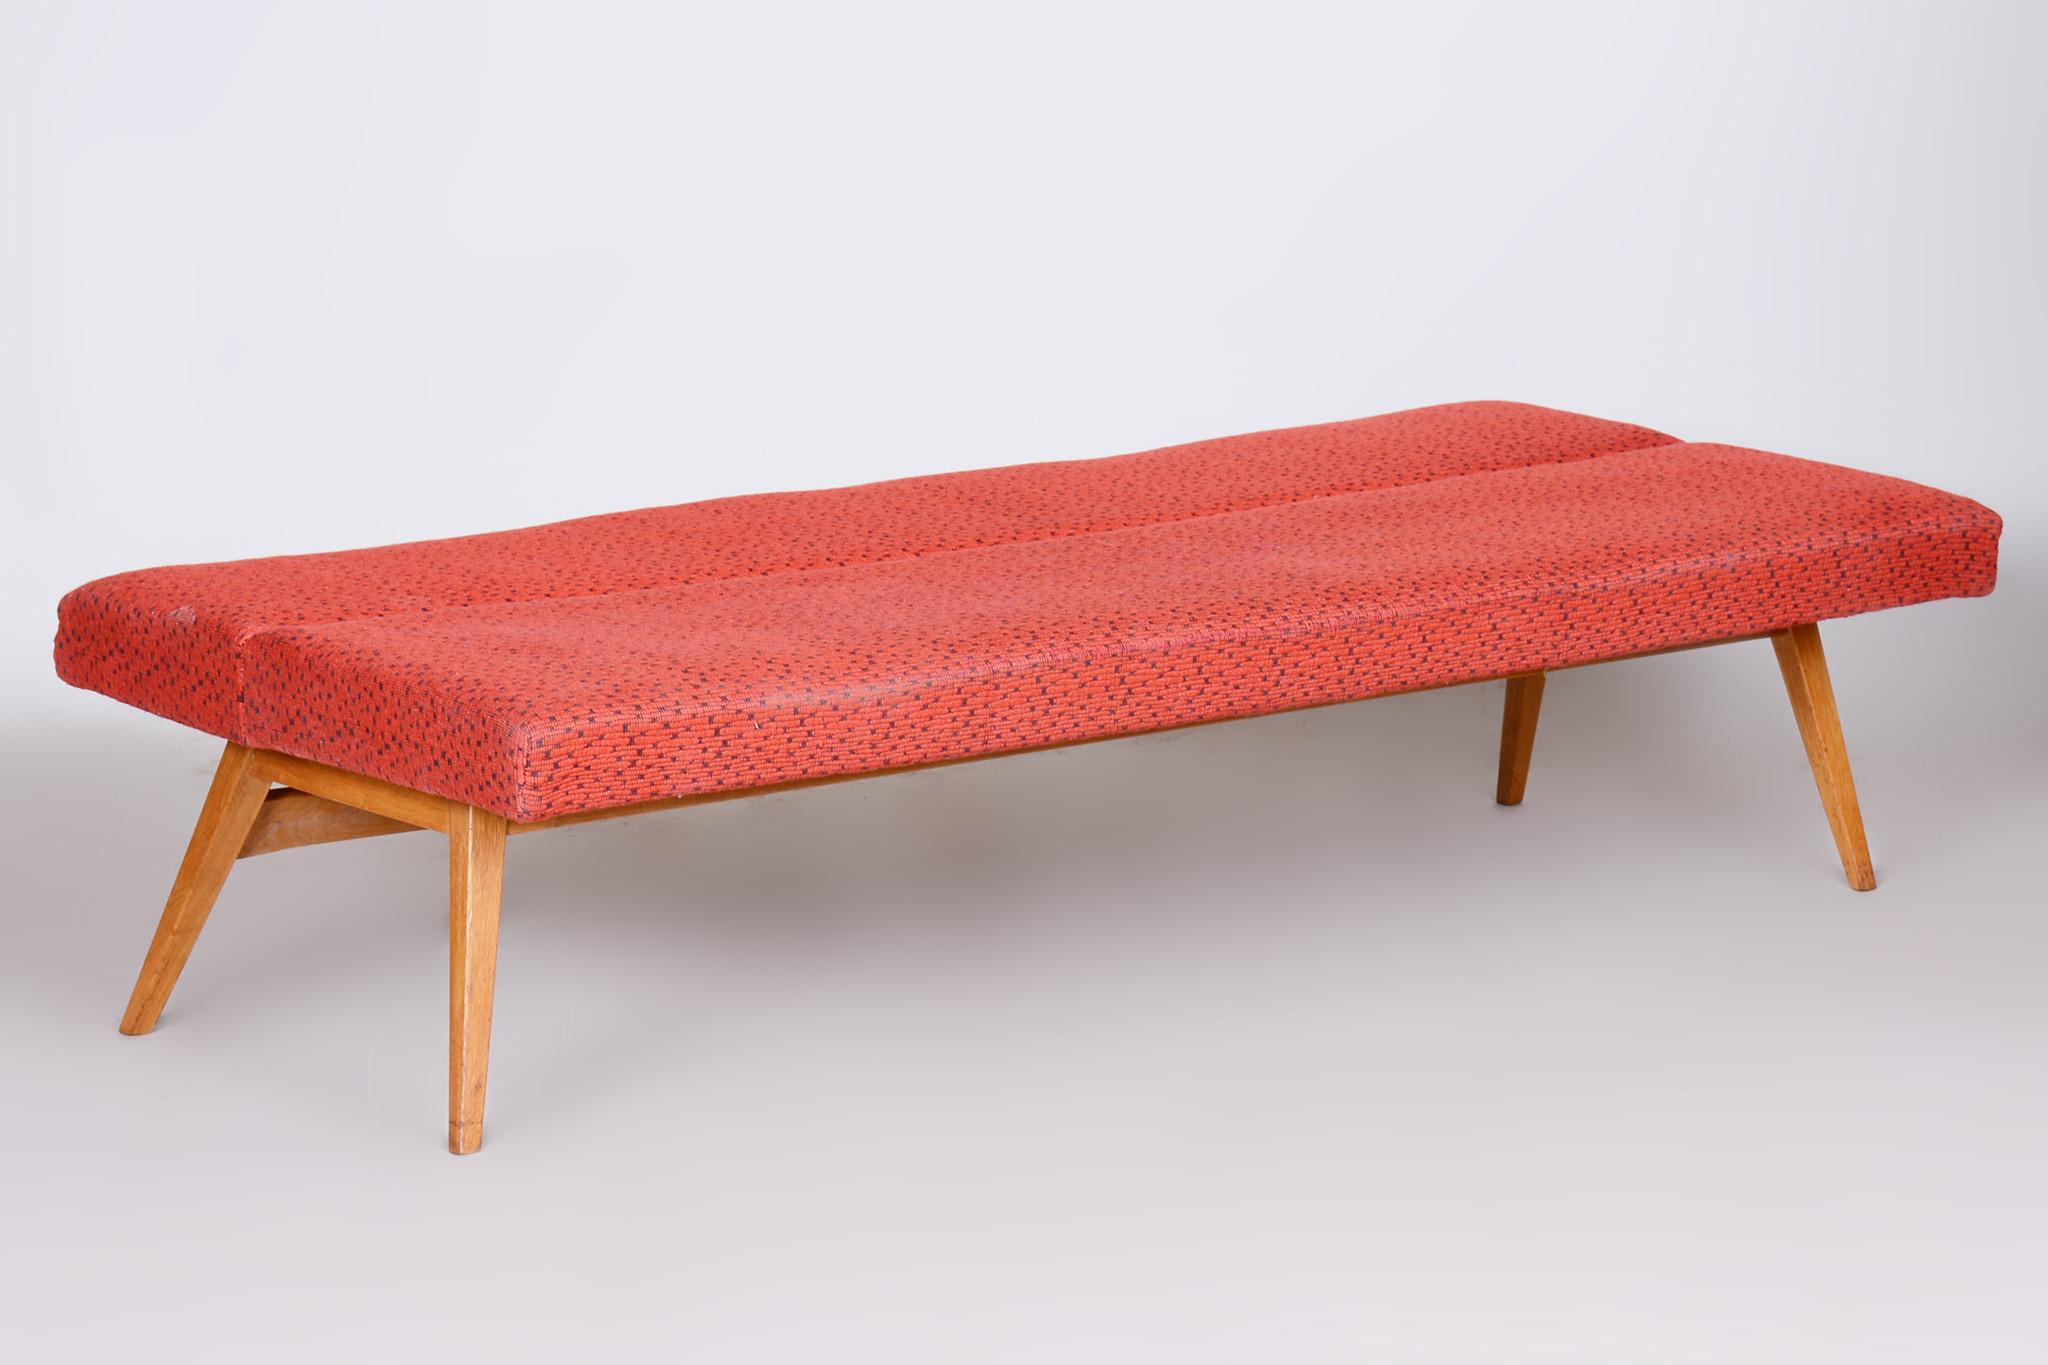 20th Century Red Midcentury Modern Oak Sofa, 1950s, Original well preserved upholstery For Sale